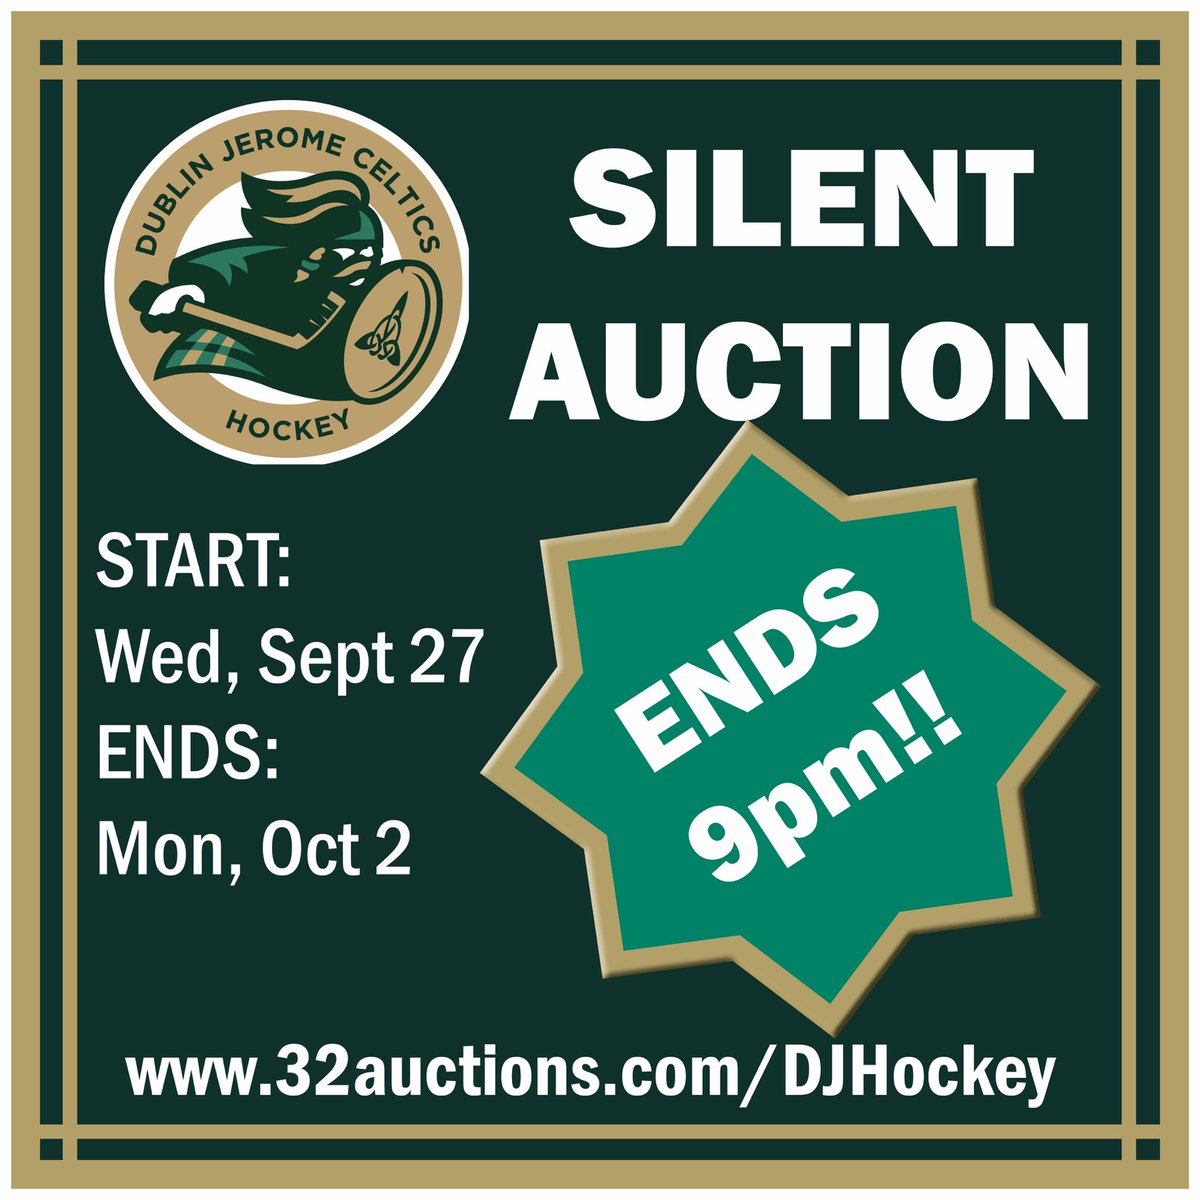 CBJ player signed jerseys and sticks up for auction! Golfing and fishing experiences! 32auctions.com/DJHockey Bidding ends TONIGHT #cbj #signedjerseys #supportlocalhockey